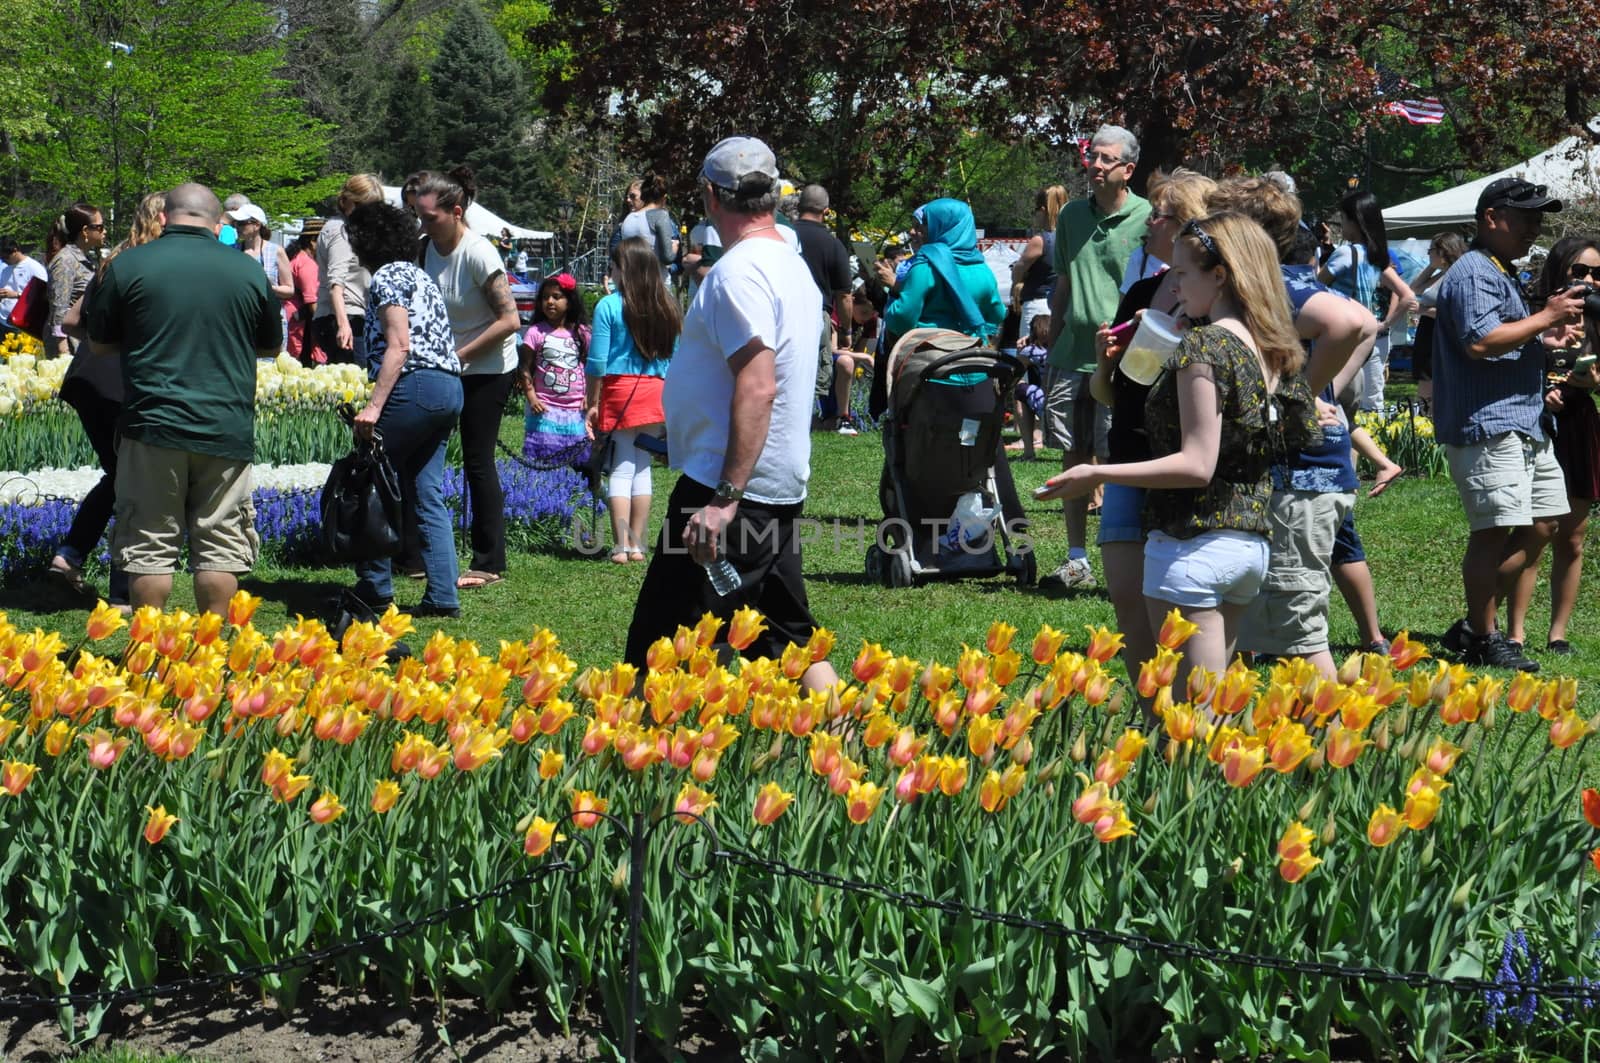 2014 Tulip Festival at Washington Park in Albany, New York State